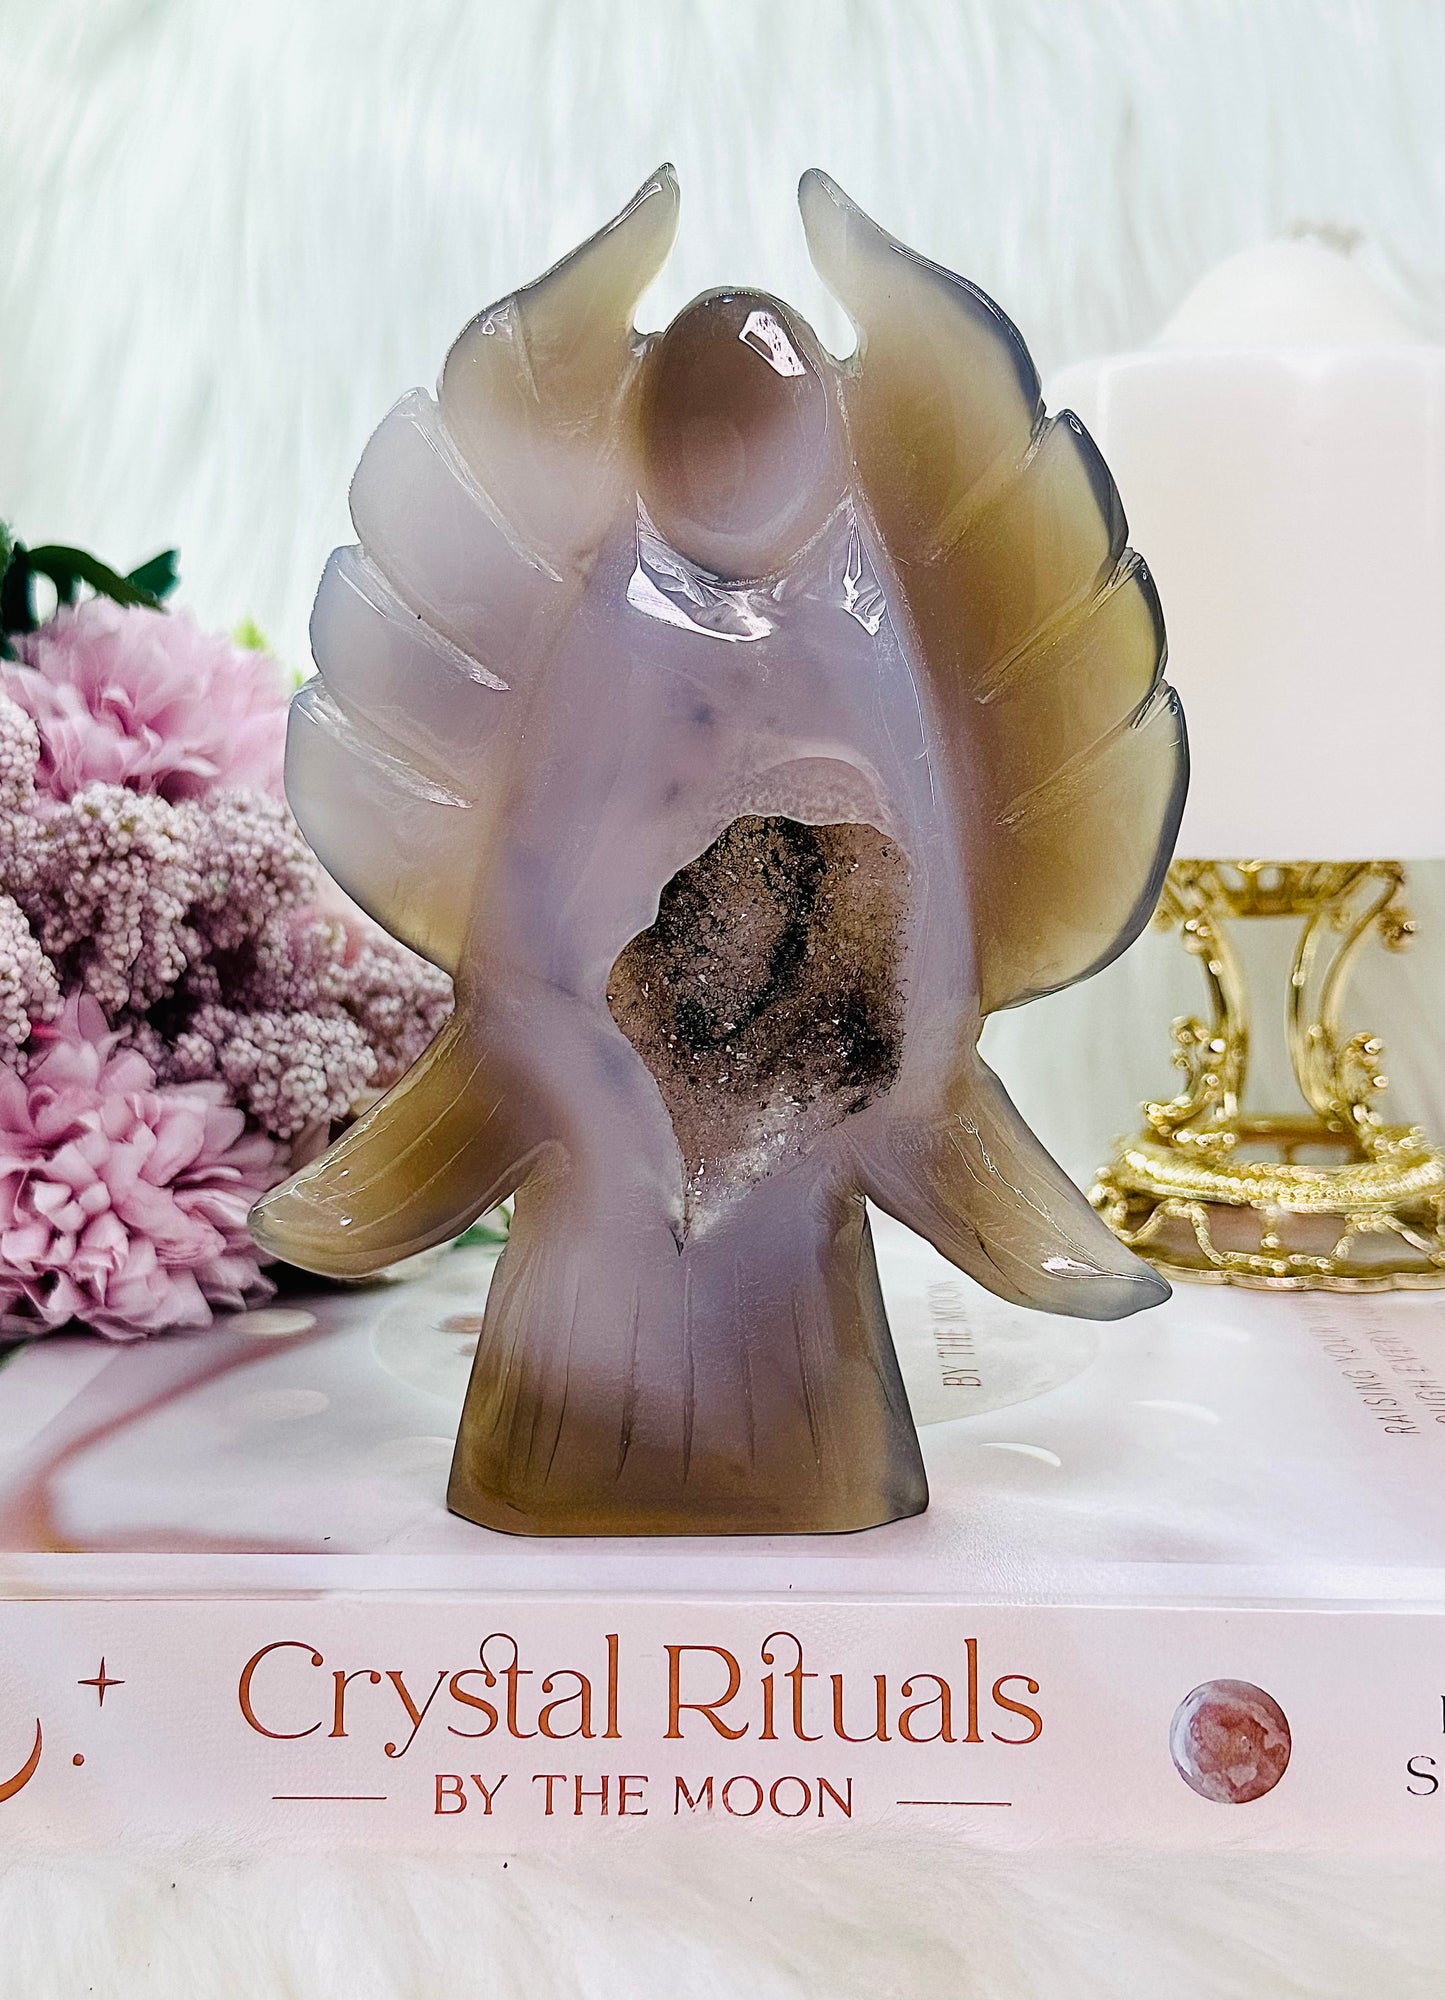 Powerful Healing Stone - Stunning Druzy Agate Crystal Angel Carving 15cm